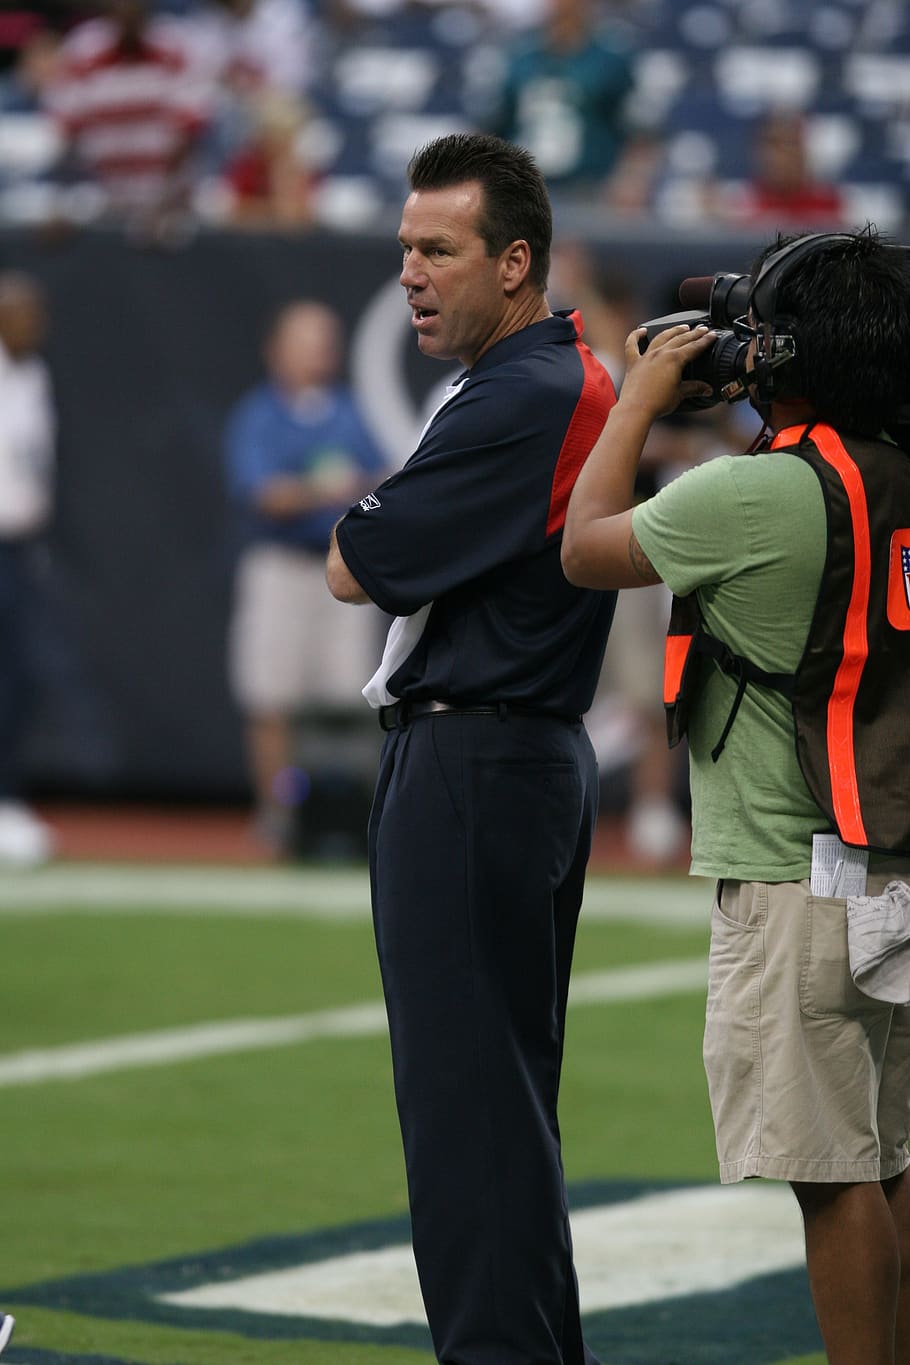 football coach, professional, nfl, stadium, game, american football, looking, coach, sport, competition